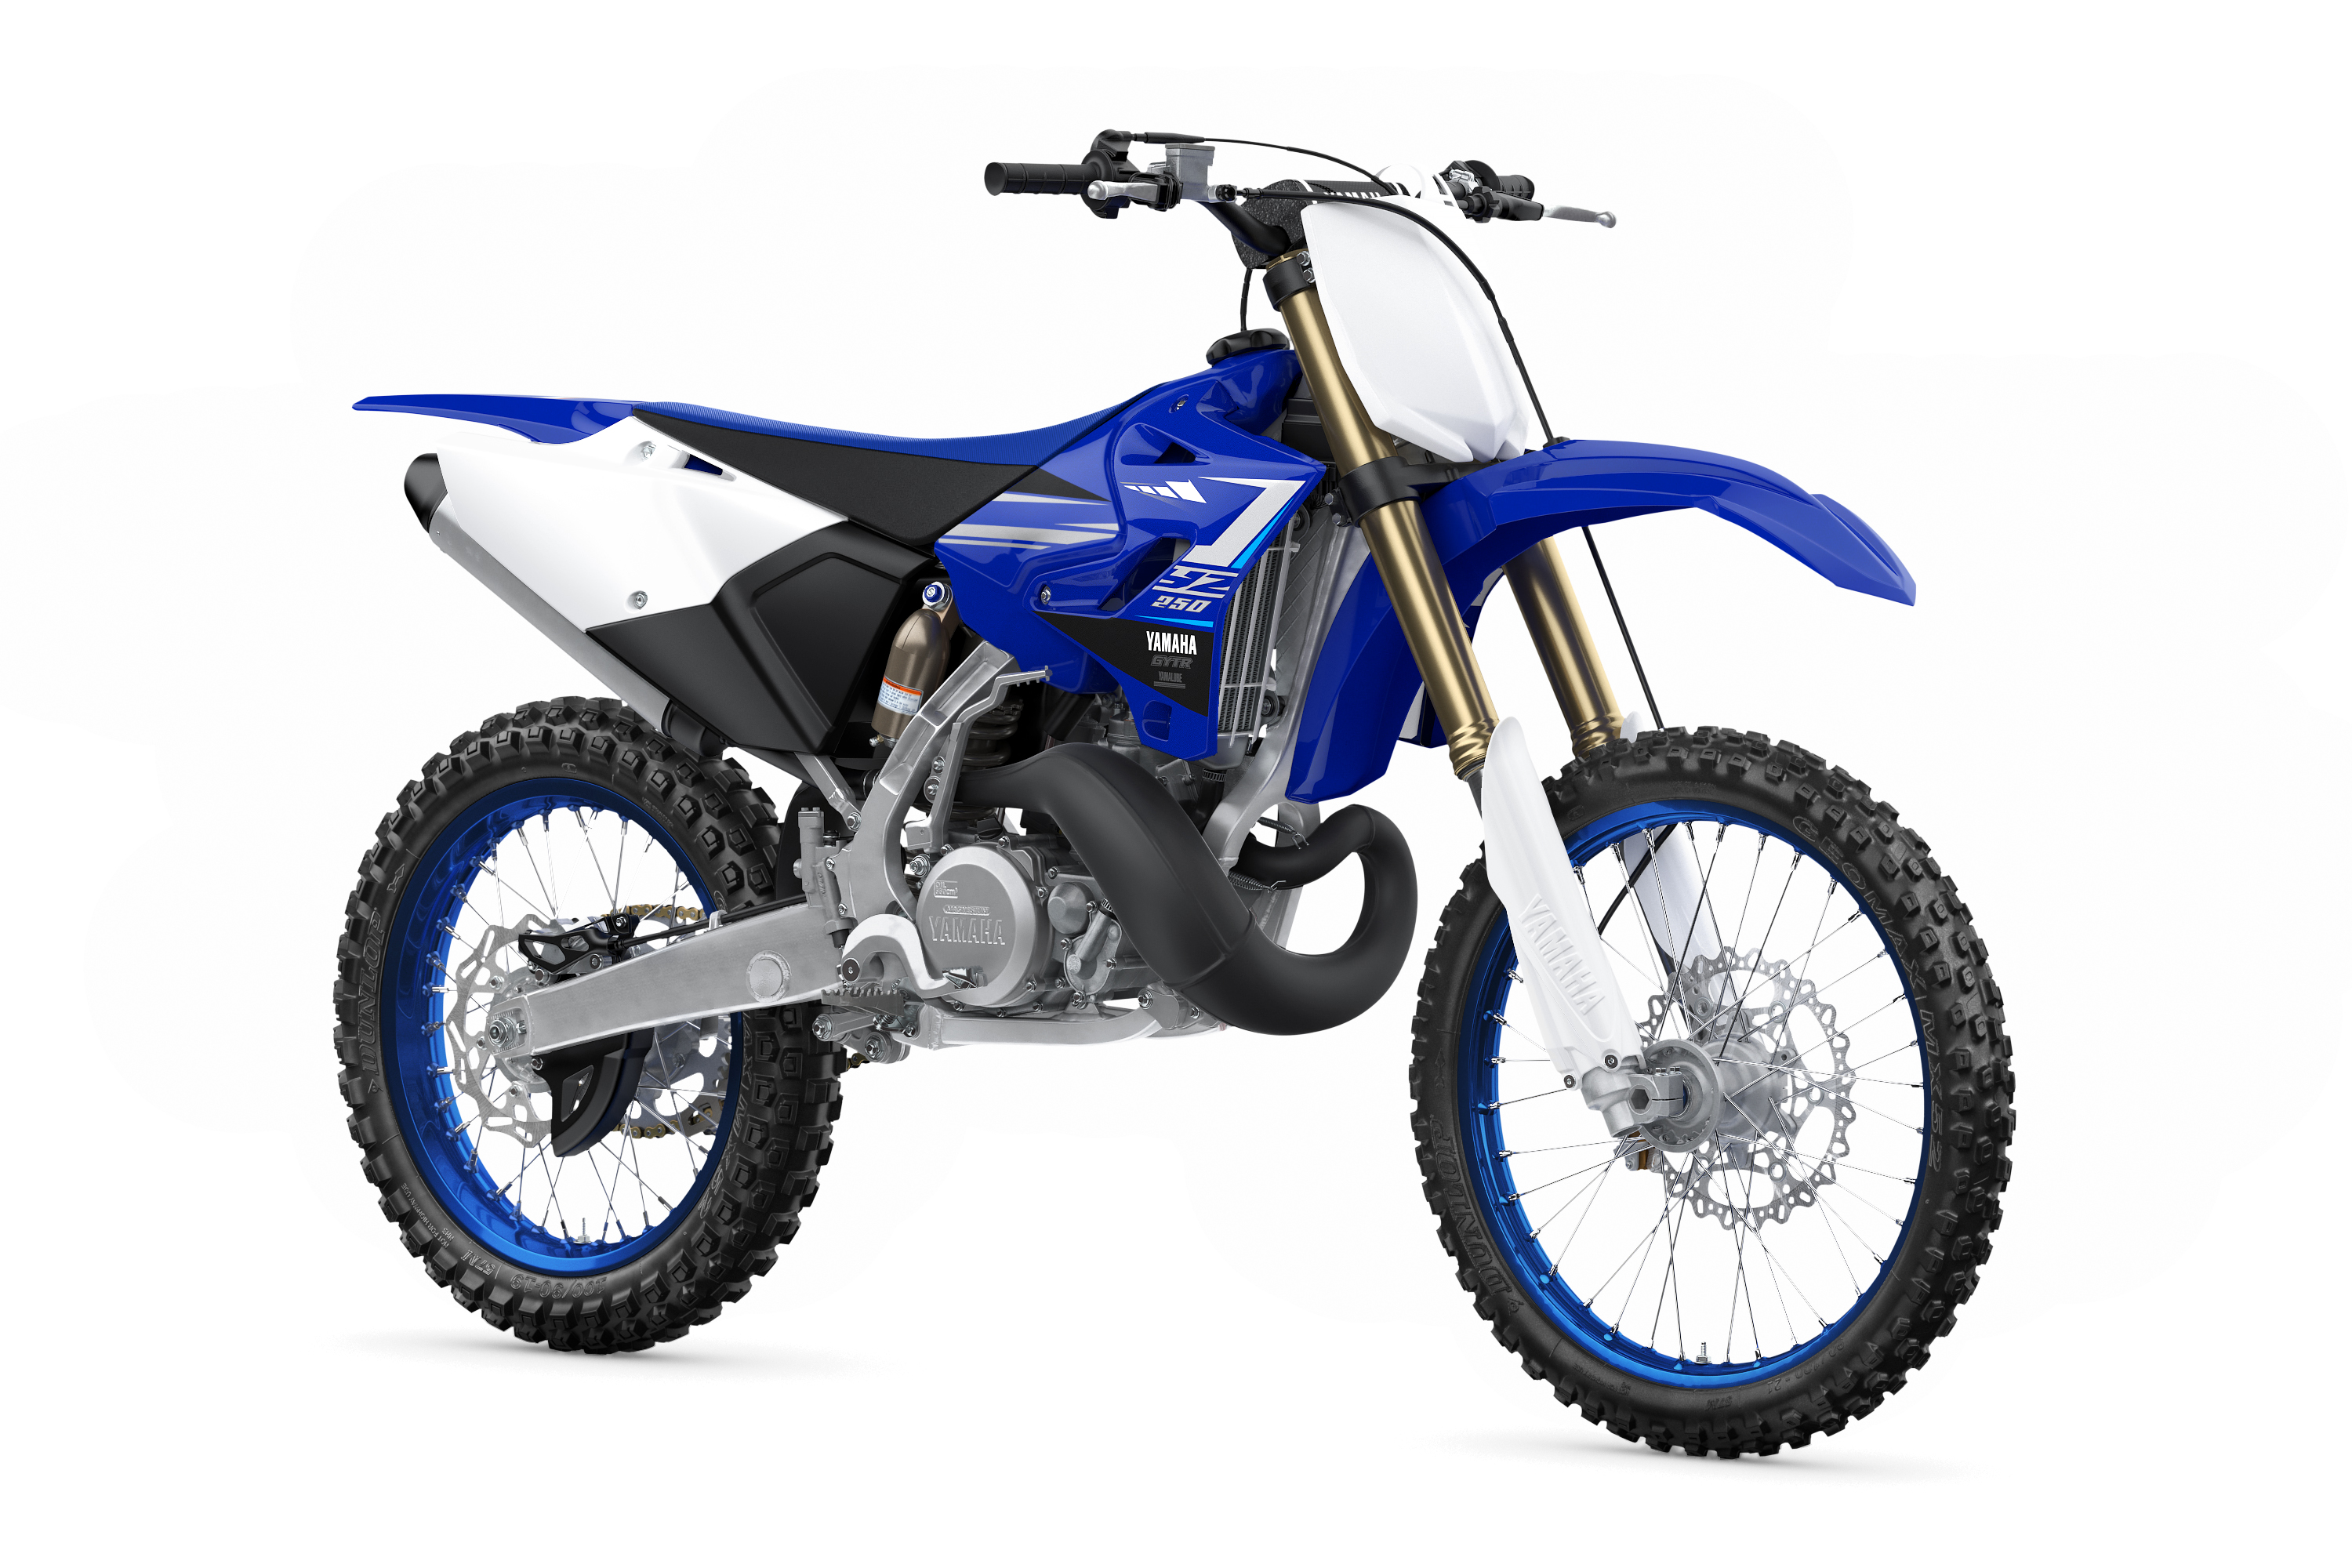 2020 Yamaha Yz250 Buyer'S Guide: Specs, Photos, Price | Cycle World